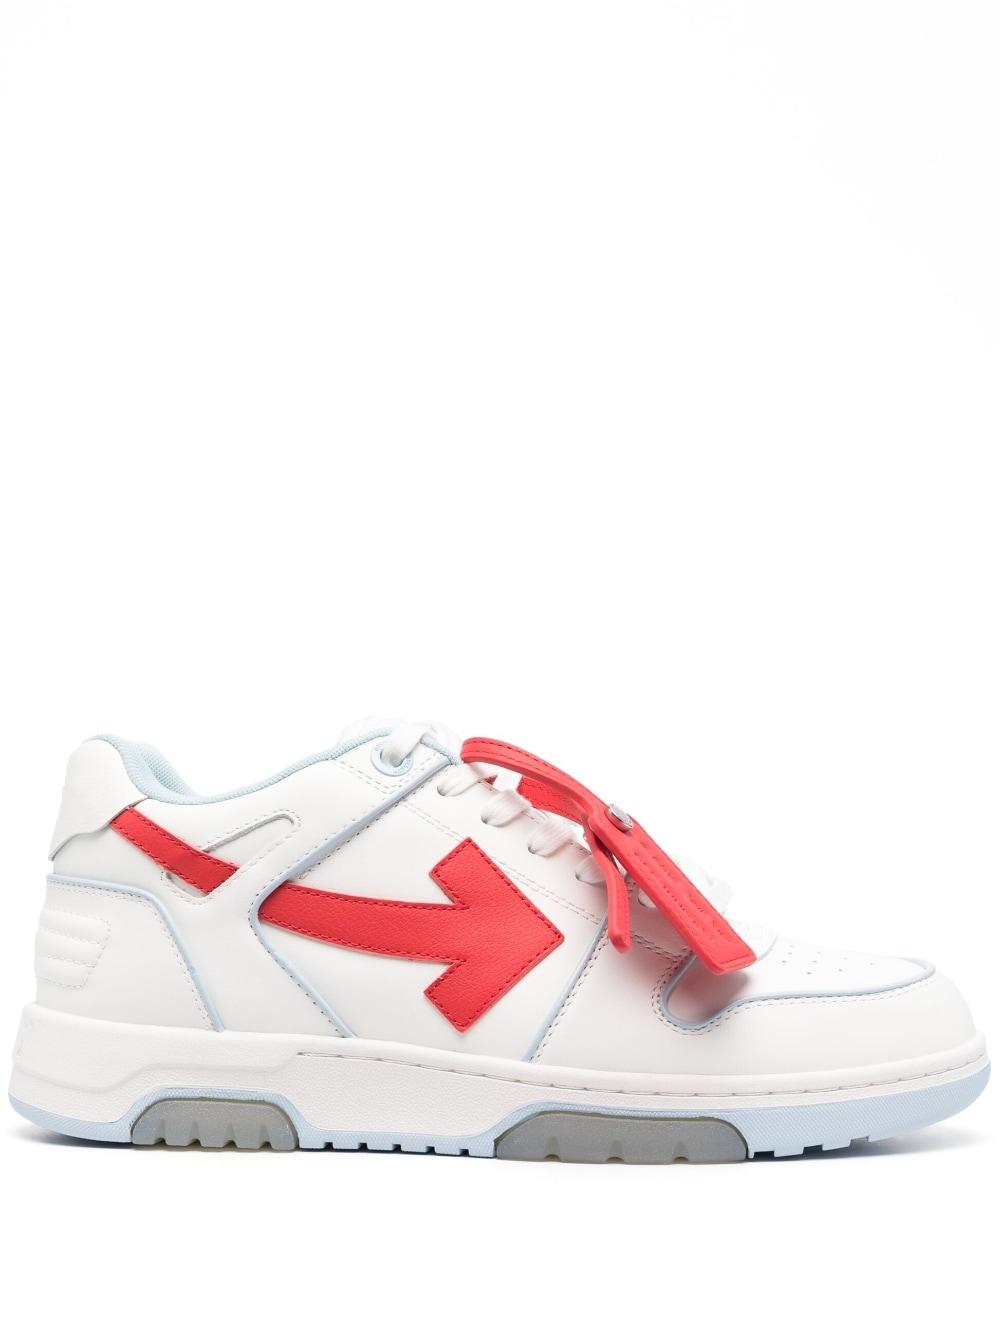 Zapatillas Out Of Office Outlined Off-White c/o Virgil Abloh de hombre ...